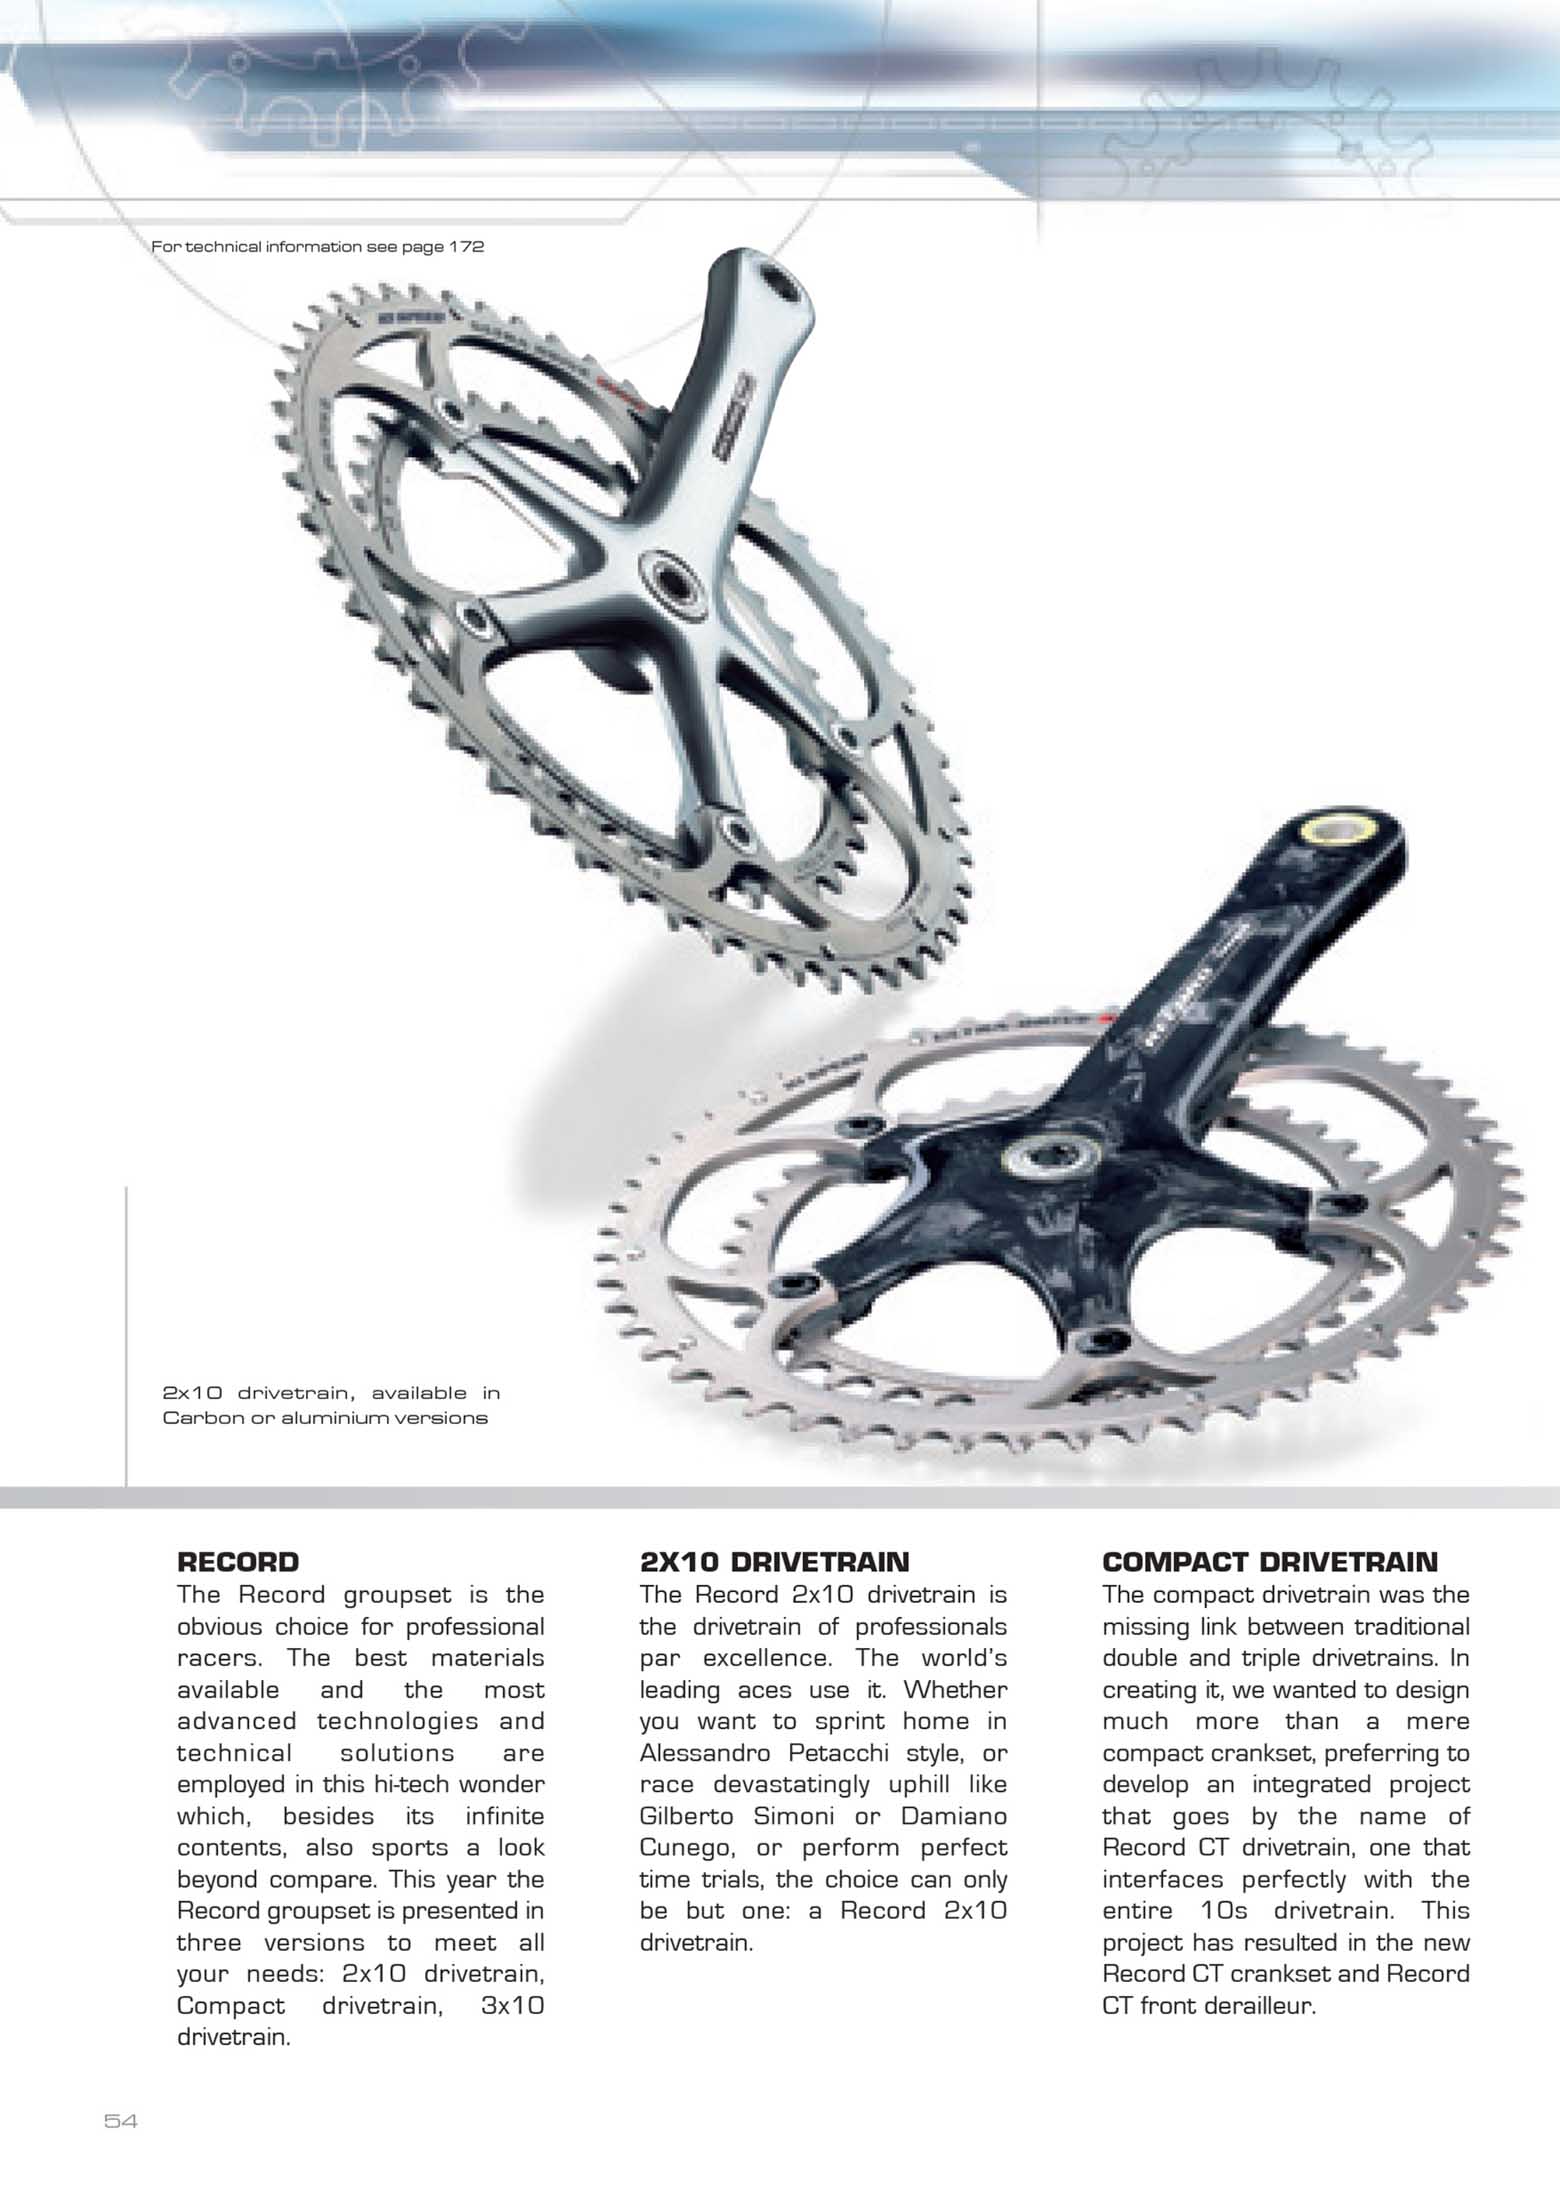 Campagnolo - 05 Products Range page 054 main image